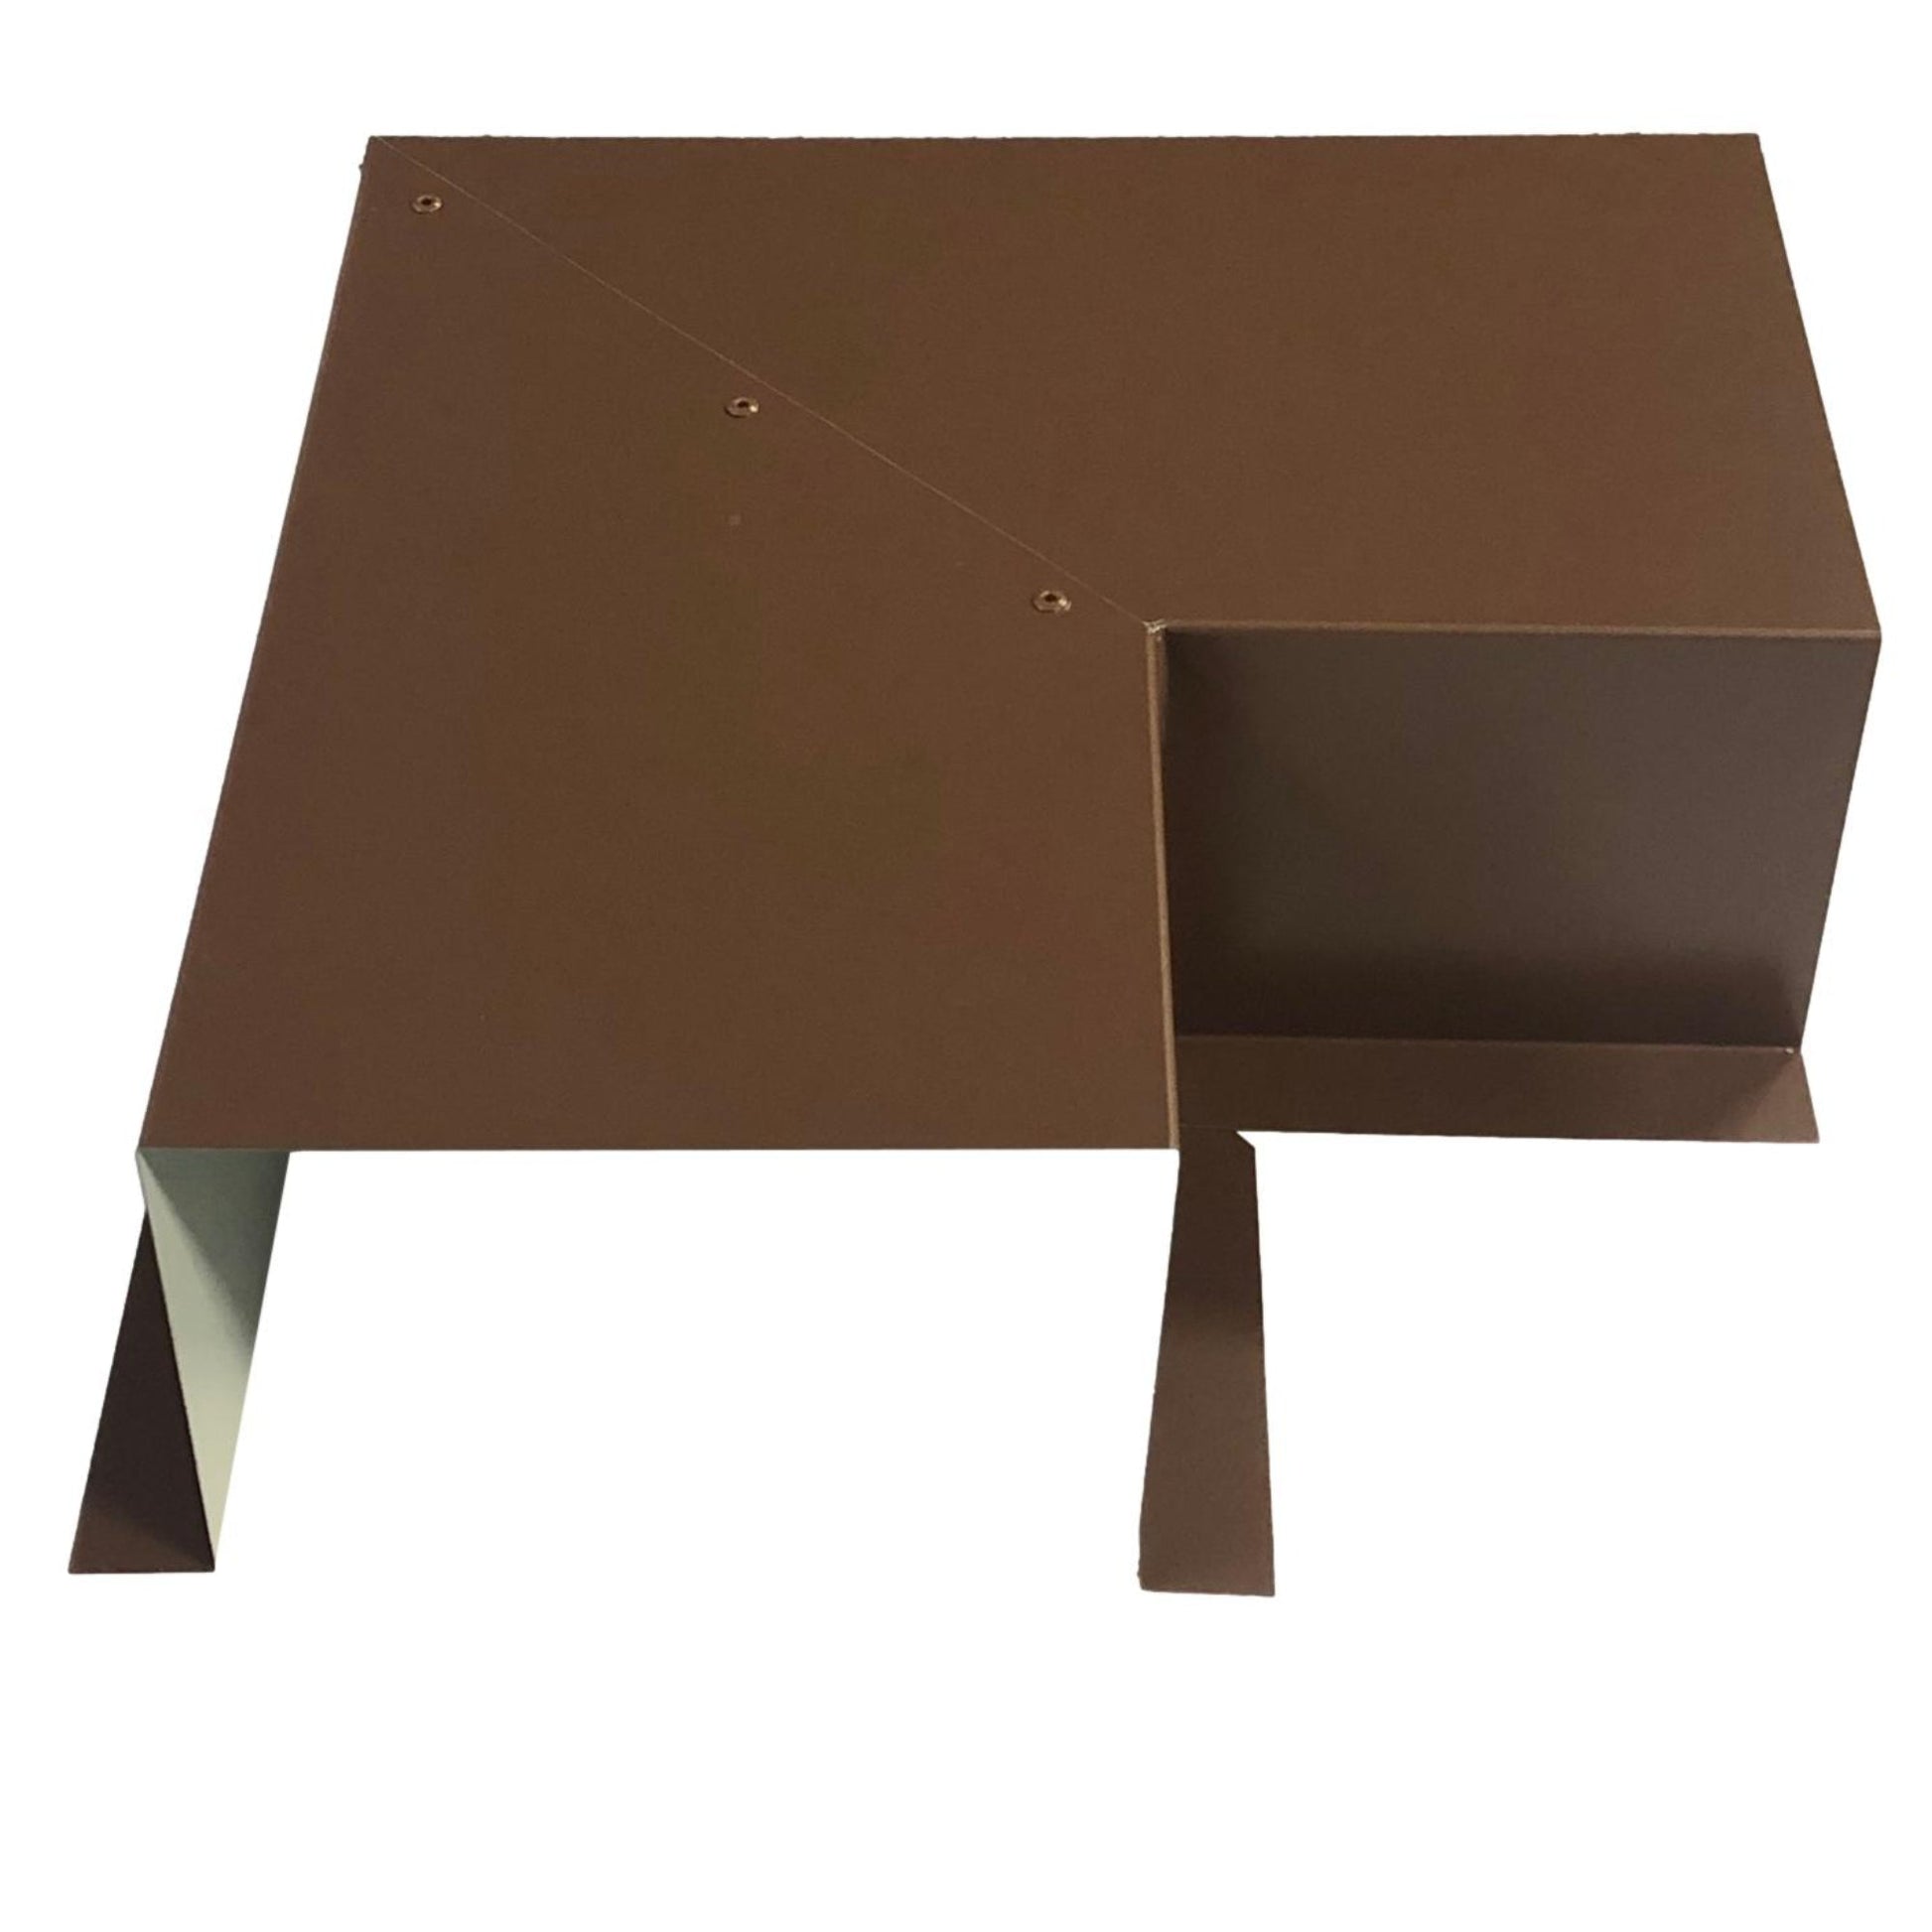 A brown, rectangular metal piece with several folds and angles, forming an abstract geometric shape. The piece features a section bent downward and another section with upward folds, creating an intricate design. Made from Perma Cover's Residential Series - Line Set Cover Side Turning Elbows - Premium Quality, it ensures easy installation against the white backdrop.